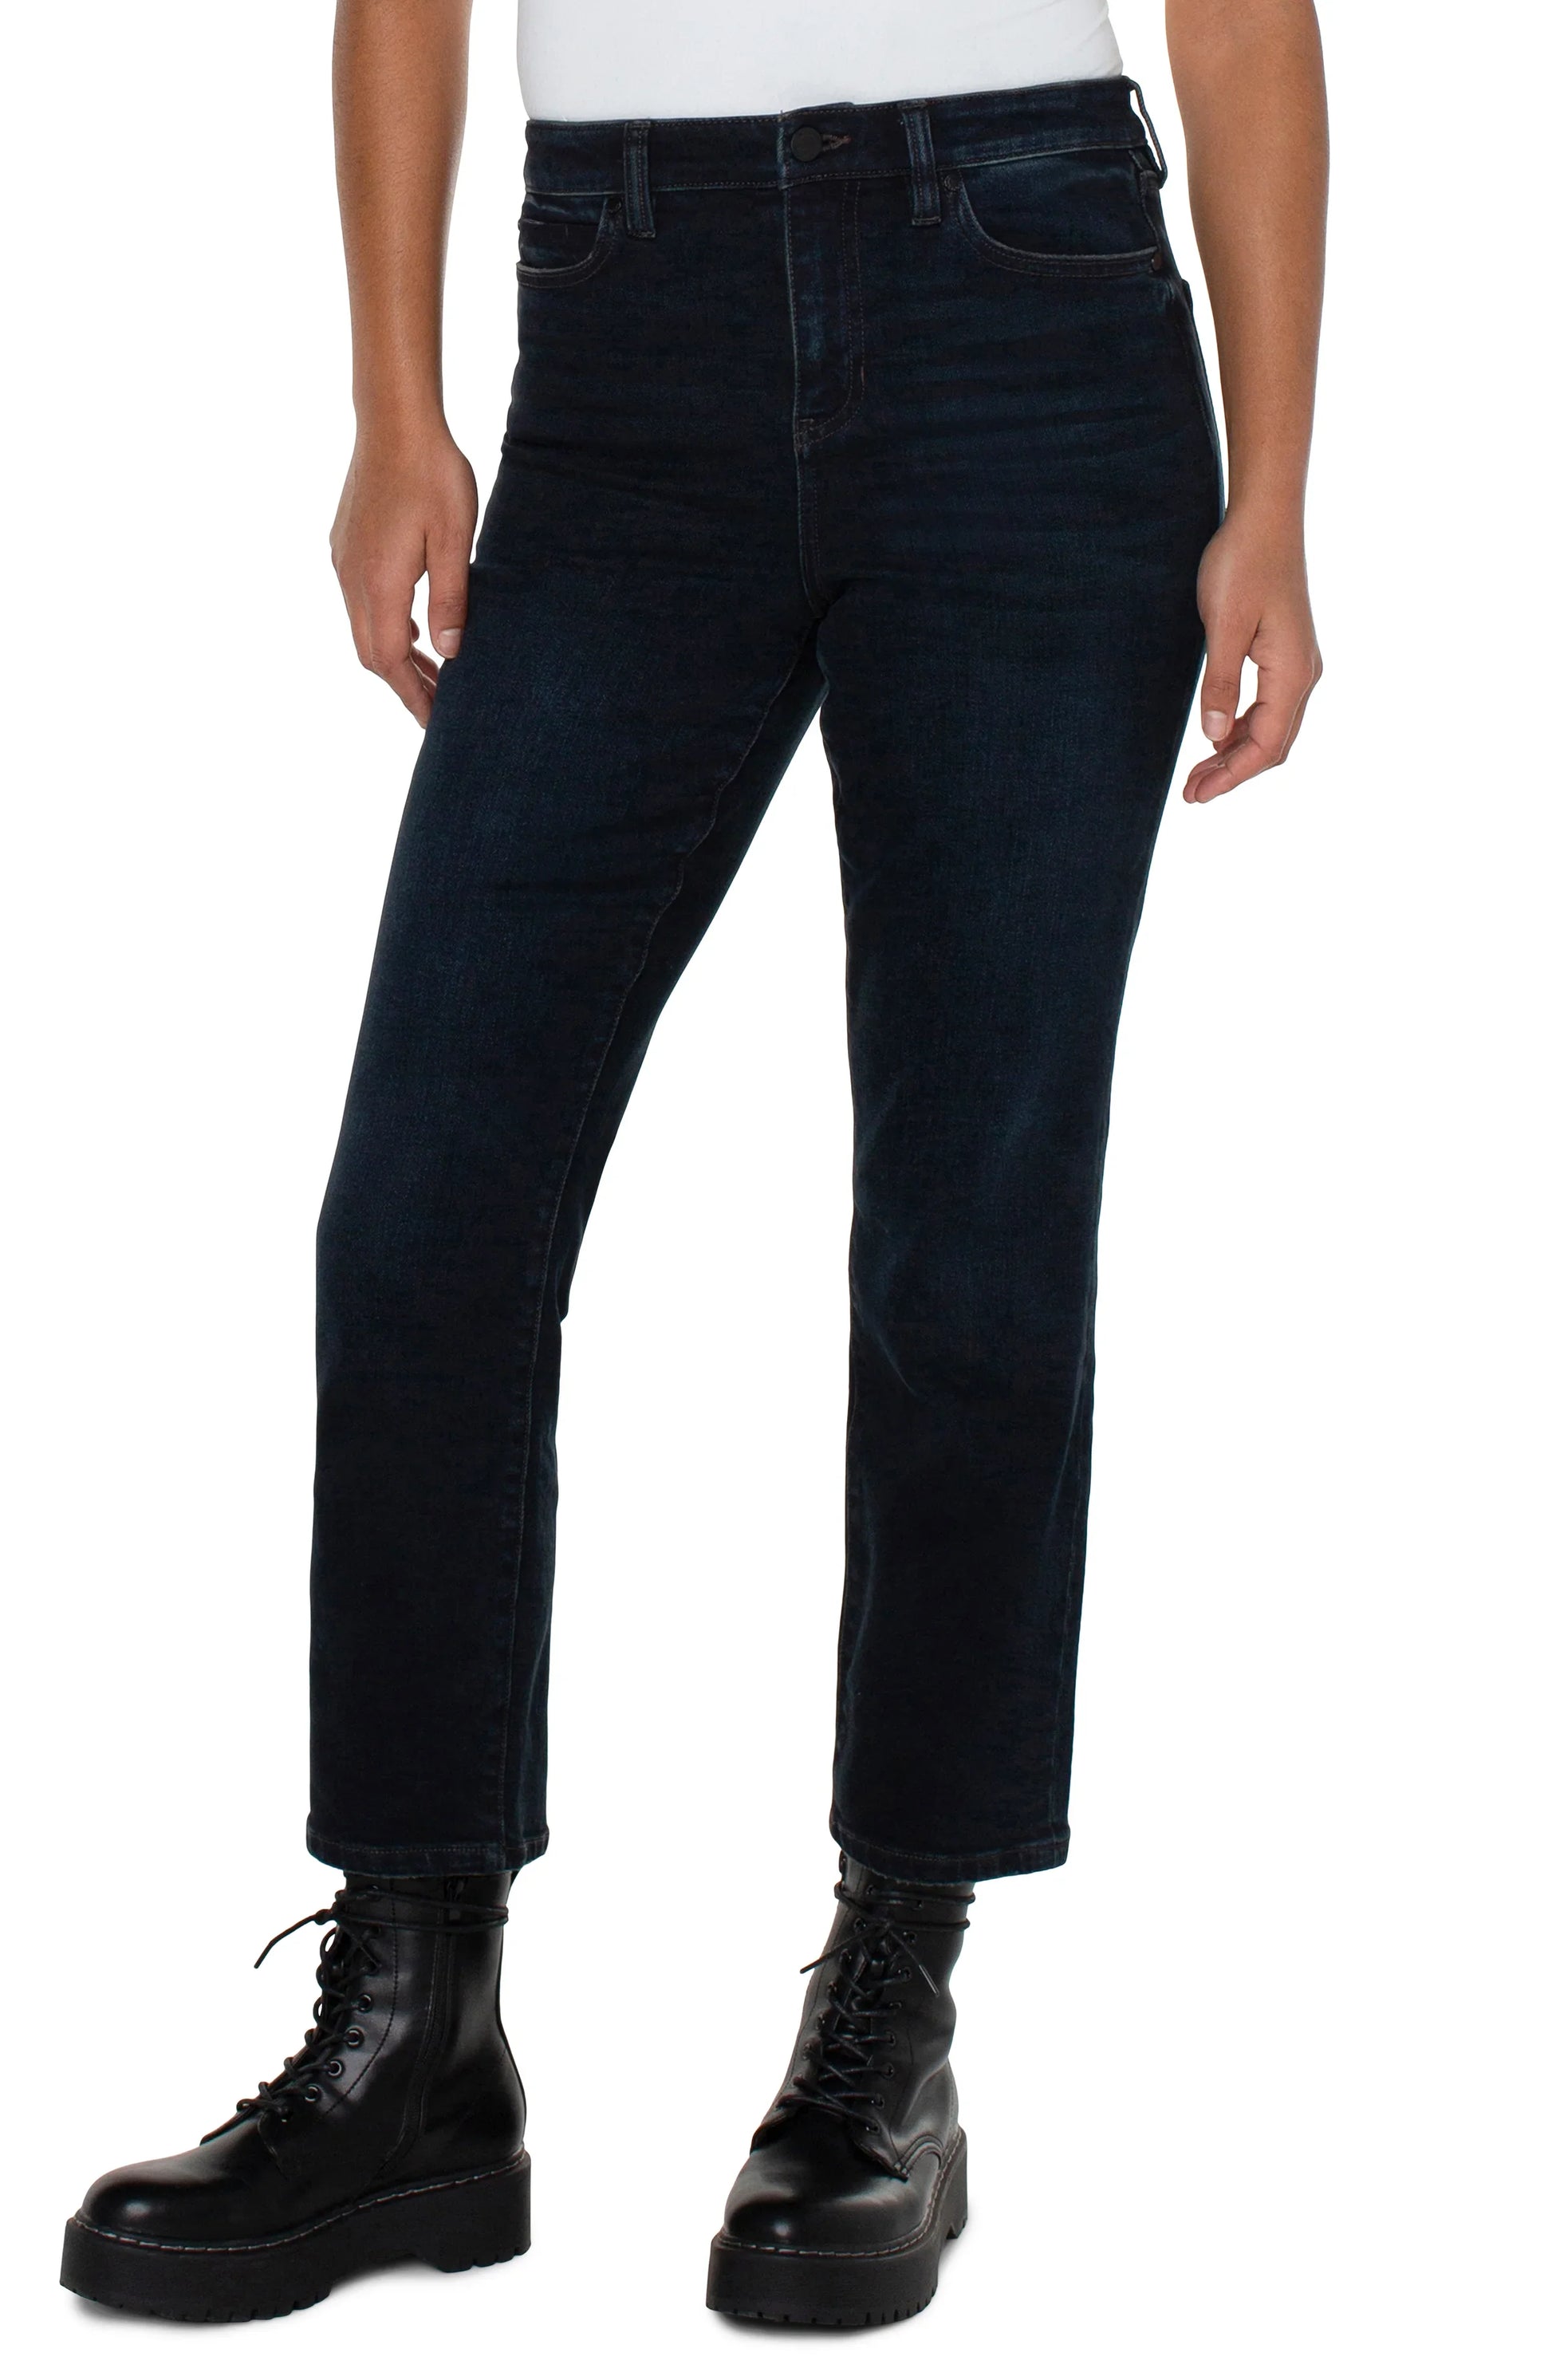 High Rise Non-Skinny Jeans - Madison's Niche 